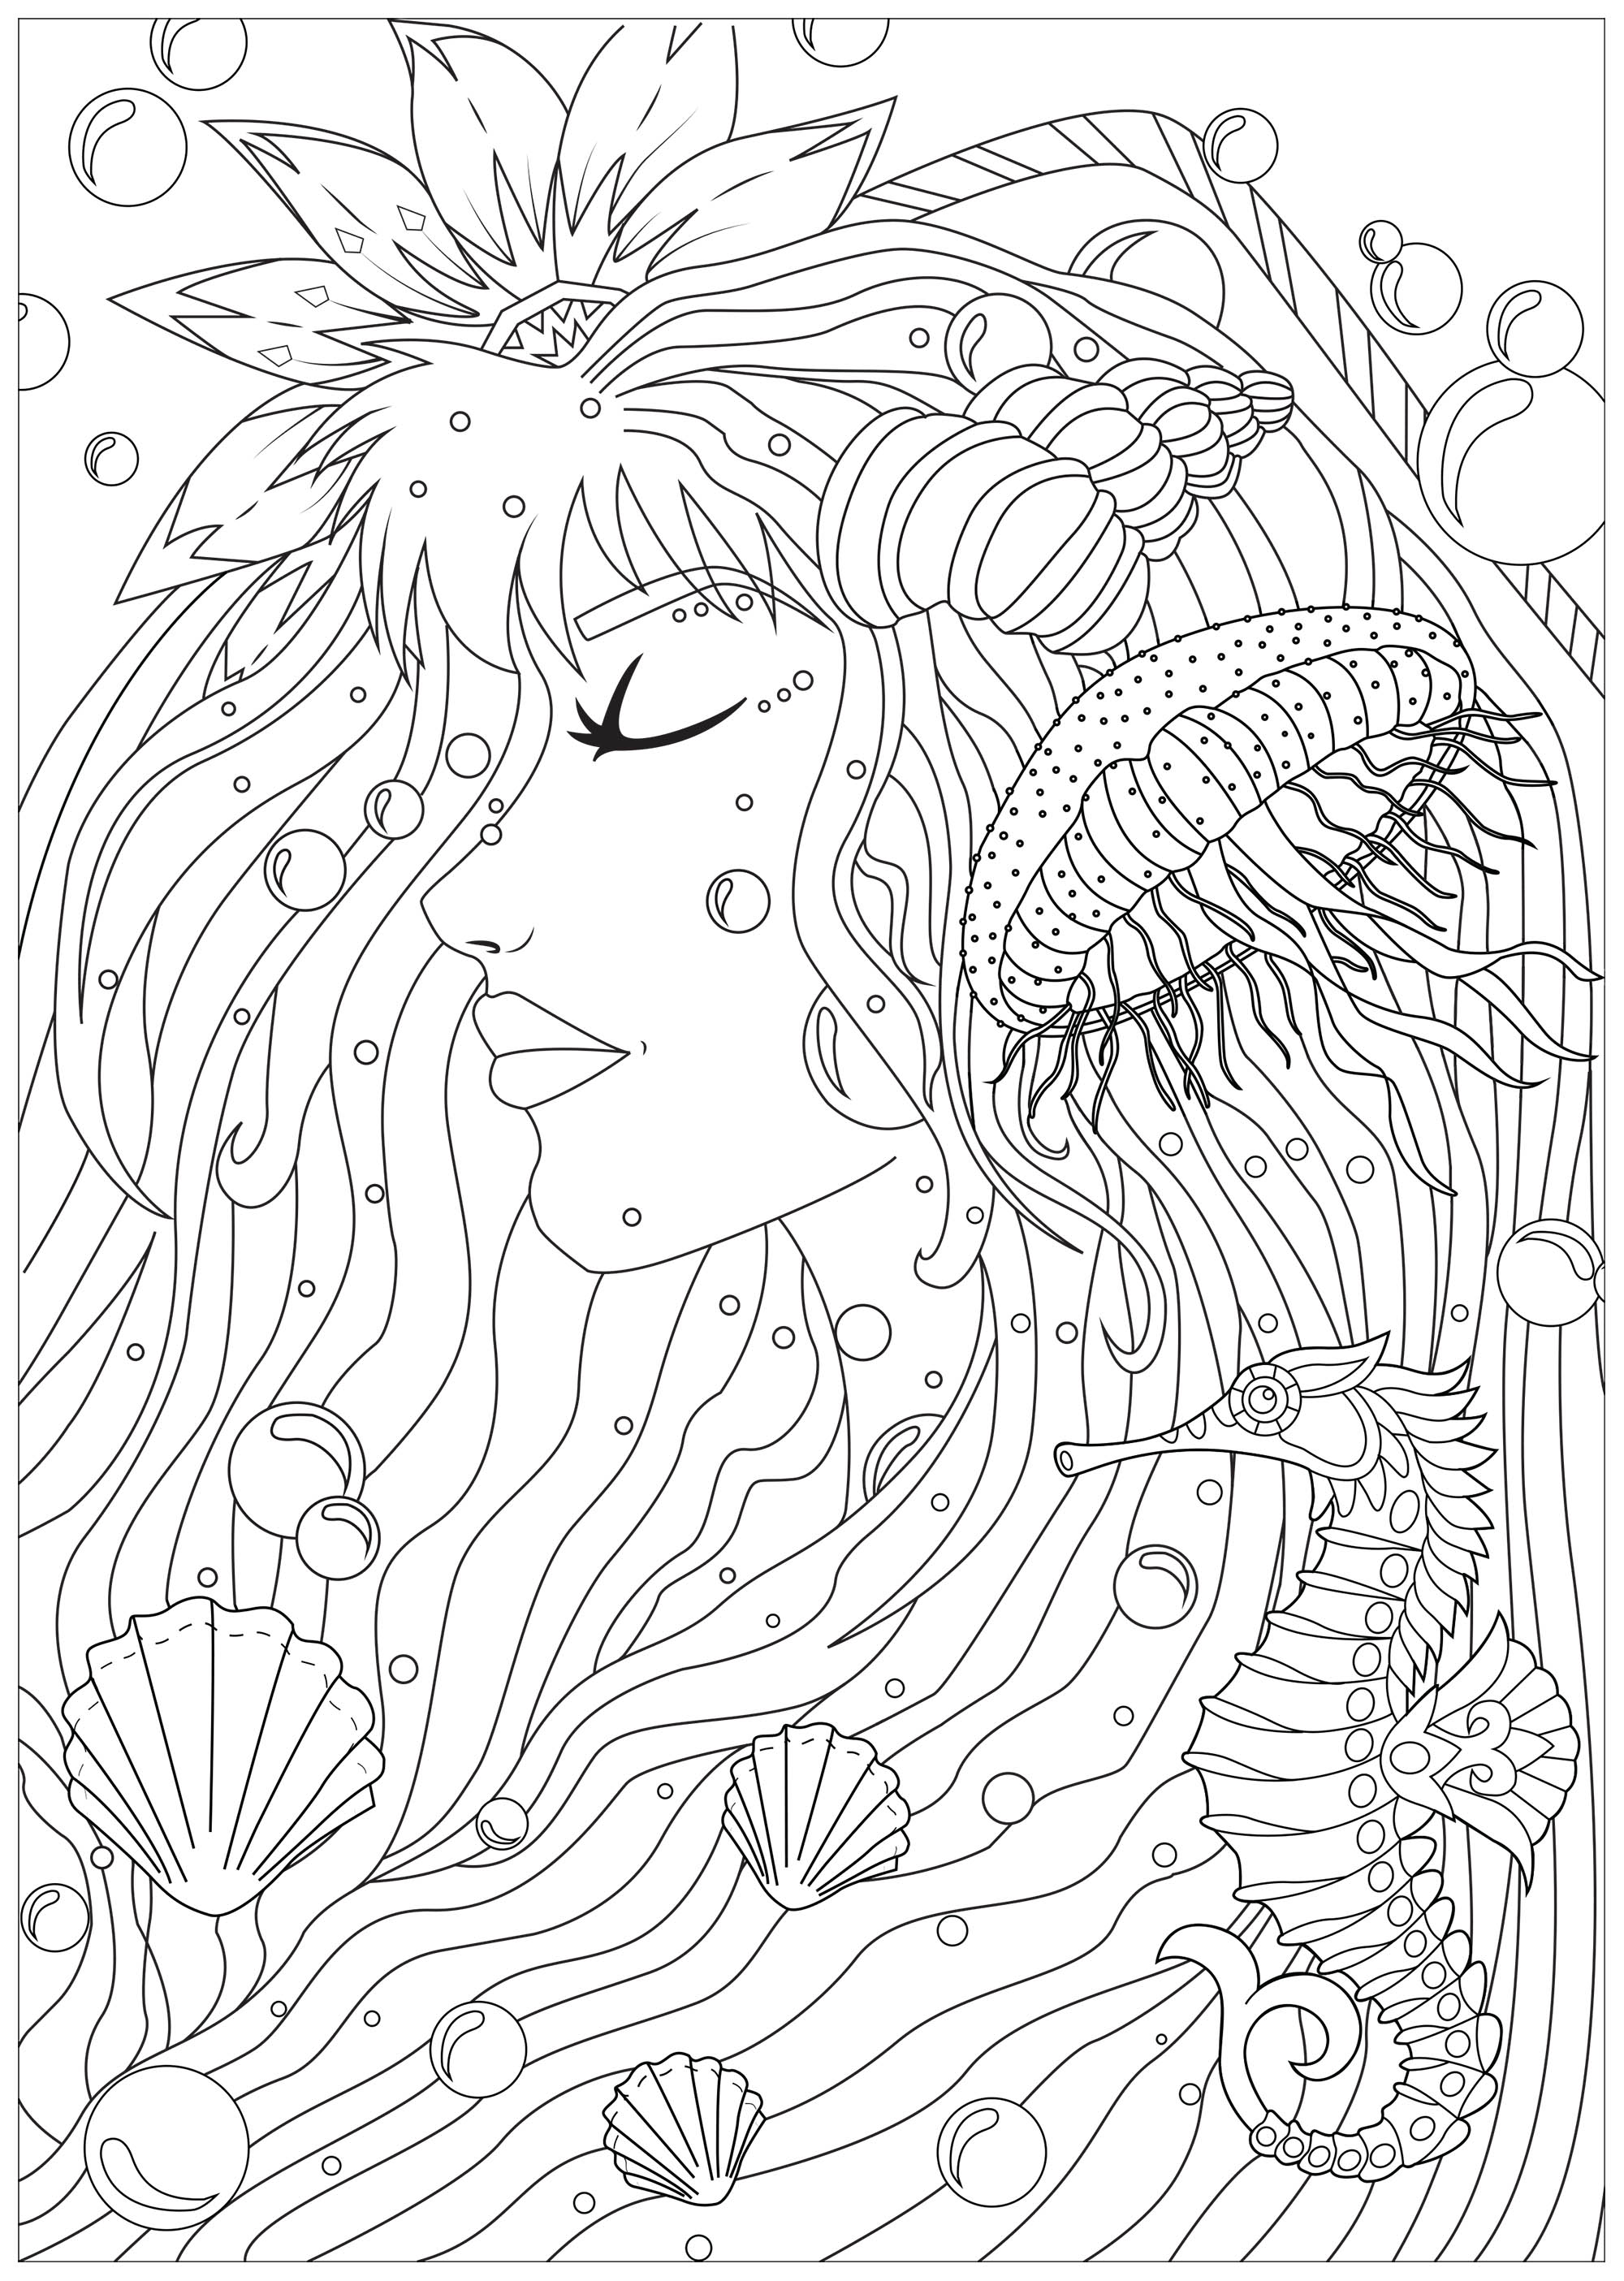 Coloring woman of the seas